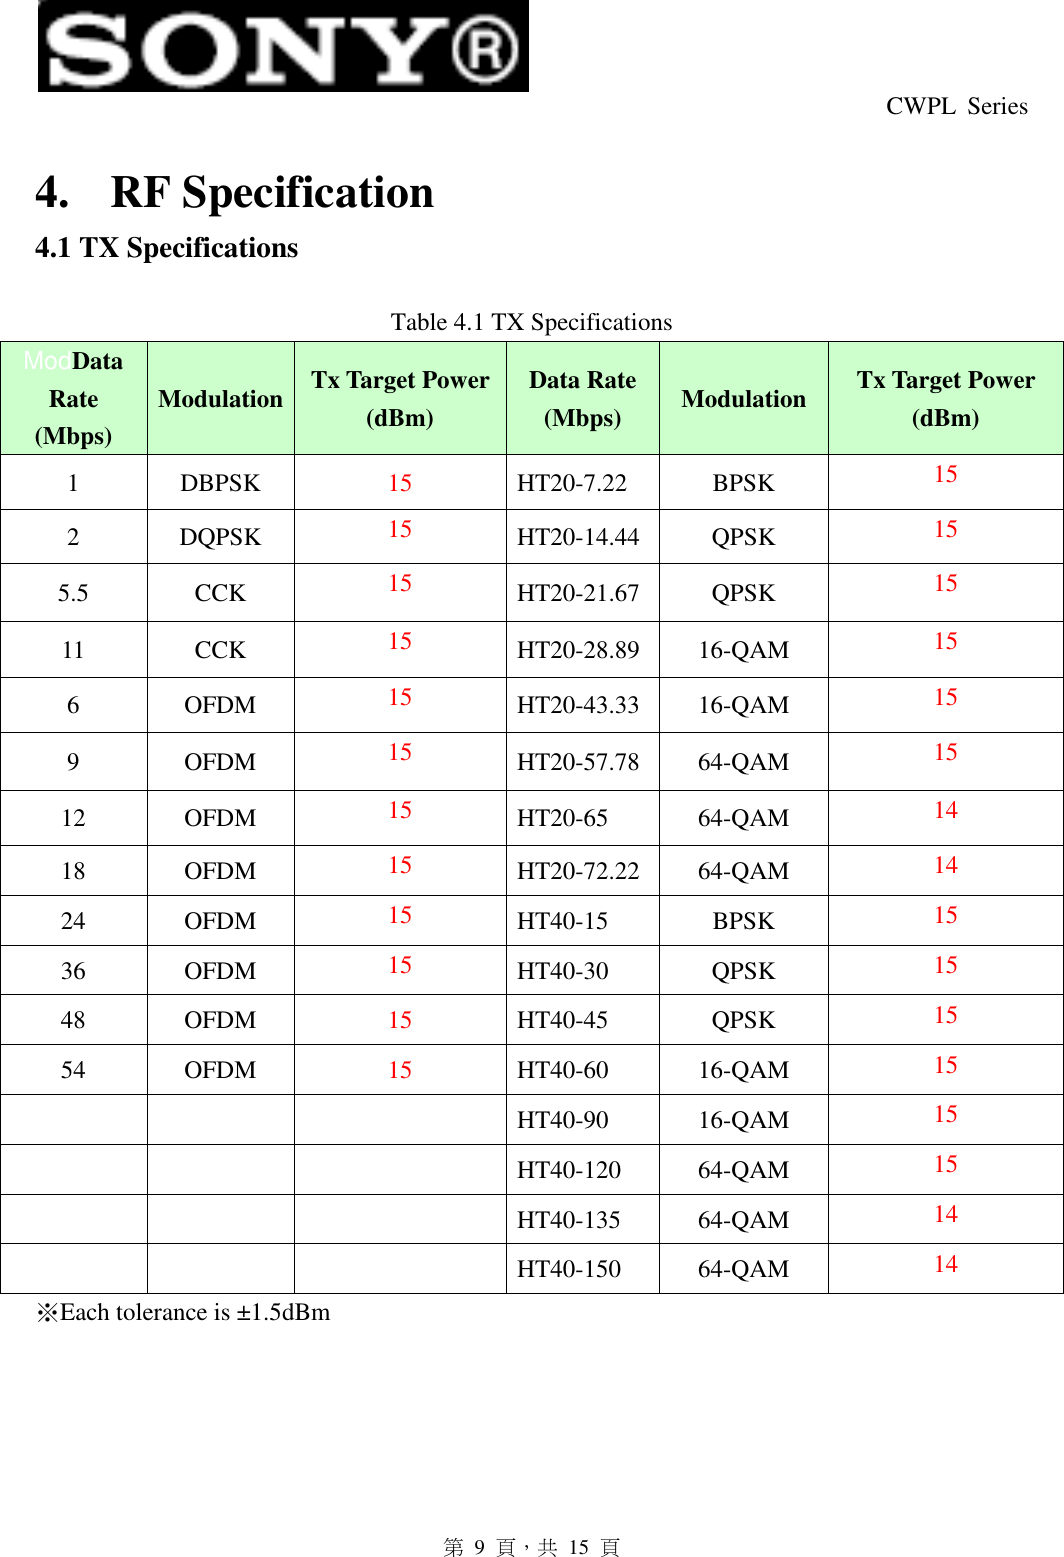  CWPL  Series   第  9  頁，共  15  頁 4. RF Specification 4.1 TX Specifications    Table 4.1 TX Specifications ModData Rate (Mbps) Modulation Tx Target Power (dBm) Data Rate (Mbps)  Modulation  Tx Target Power (dBm) 1  DBPSK  15  HT20-7.22  BPSK  15 2  DQPSK  15 HT20-14.44  QPSK  15 5.5  CCK  15 HT20-21.67  QPSK  15 11  CCK  15 HT20-28.89  16-QAM  15 6  OFDM  15 HT20-43.33  16-QAM  15 9  OFDM  15 HT20-57.78  64-QAM  15 12  OFDM  15 HT20-65  64-QAM  14 18  OFDM  15 HT20-72.22  64-QAM  14 24  OFDM  15 HT40-15  BPSK  15 36  OFDM  15 HT40-30  QPSK  15 48  OFDM  15  HT40-45  QPSK  15 54  OFDM  15  HT40-60  16-QAM  15       HT40-90  16-QAM  15       HT40-120  64-QAM  15       HT40-135  64-QAM  14       HT40-150  64-QAM  14 ※Each tolerance is ±1.5dBm     